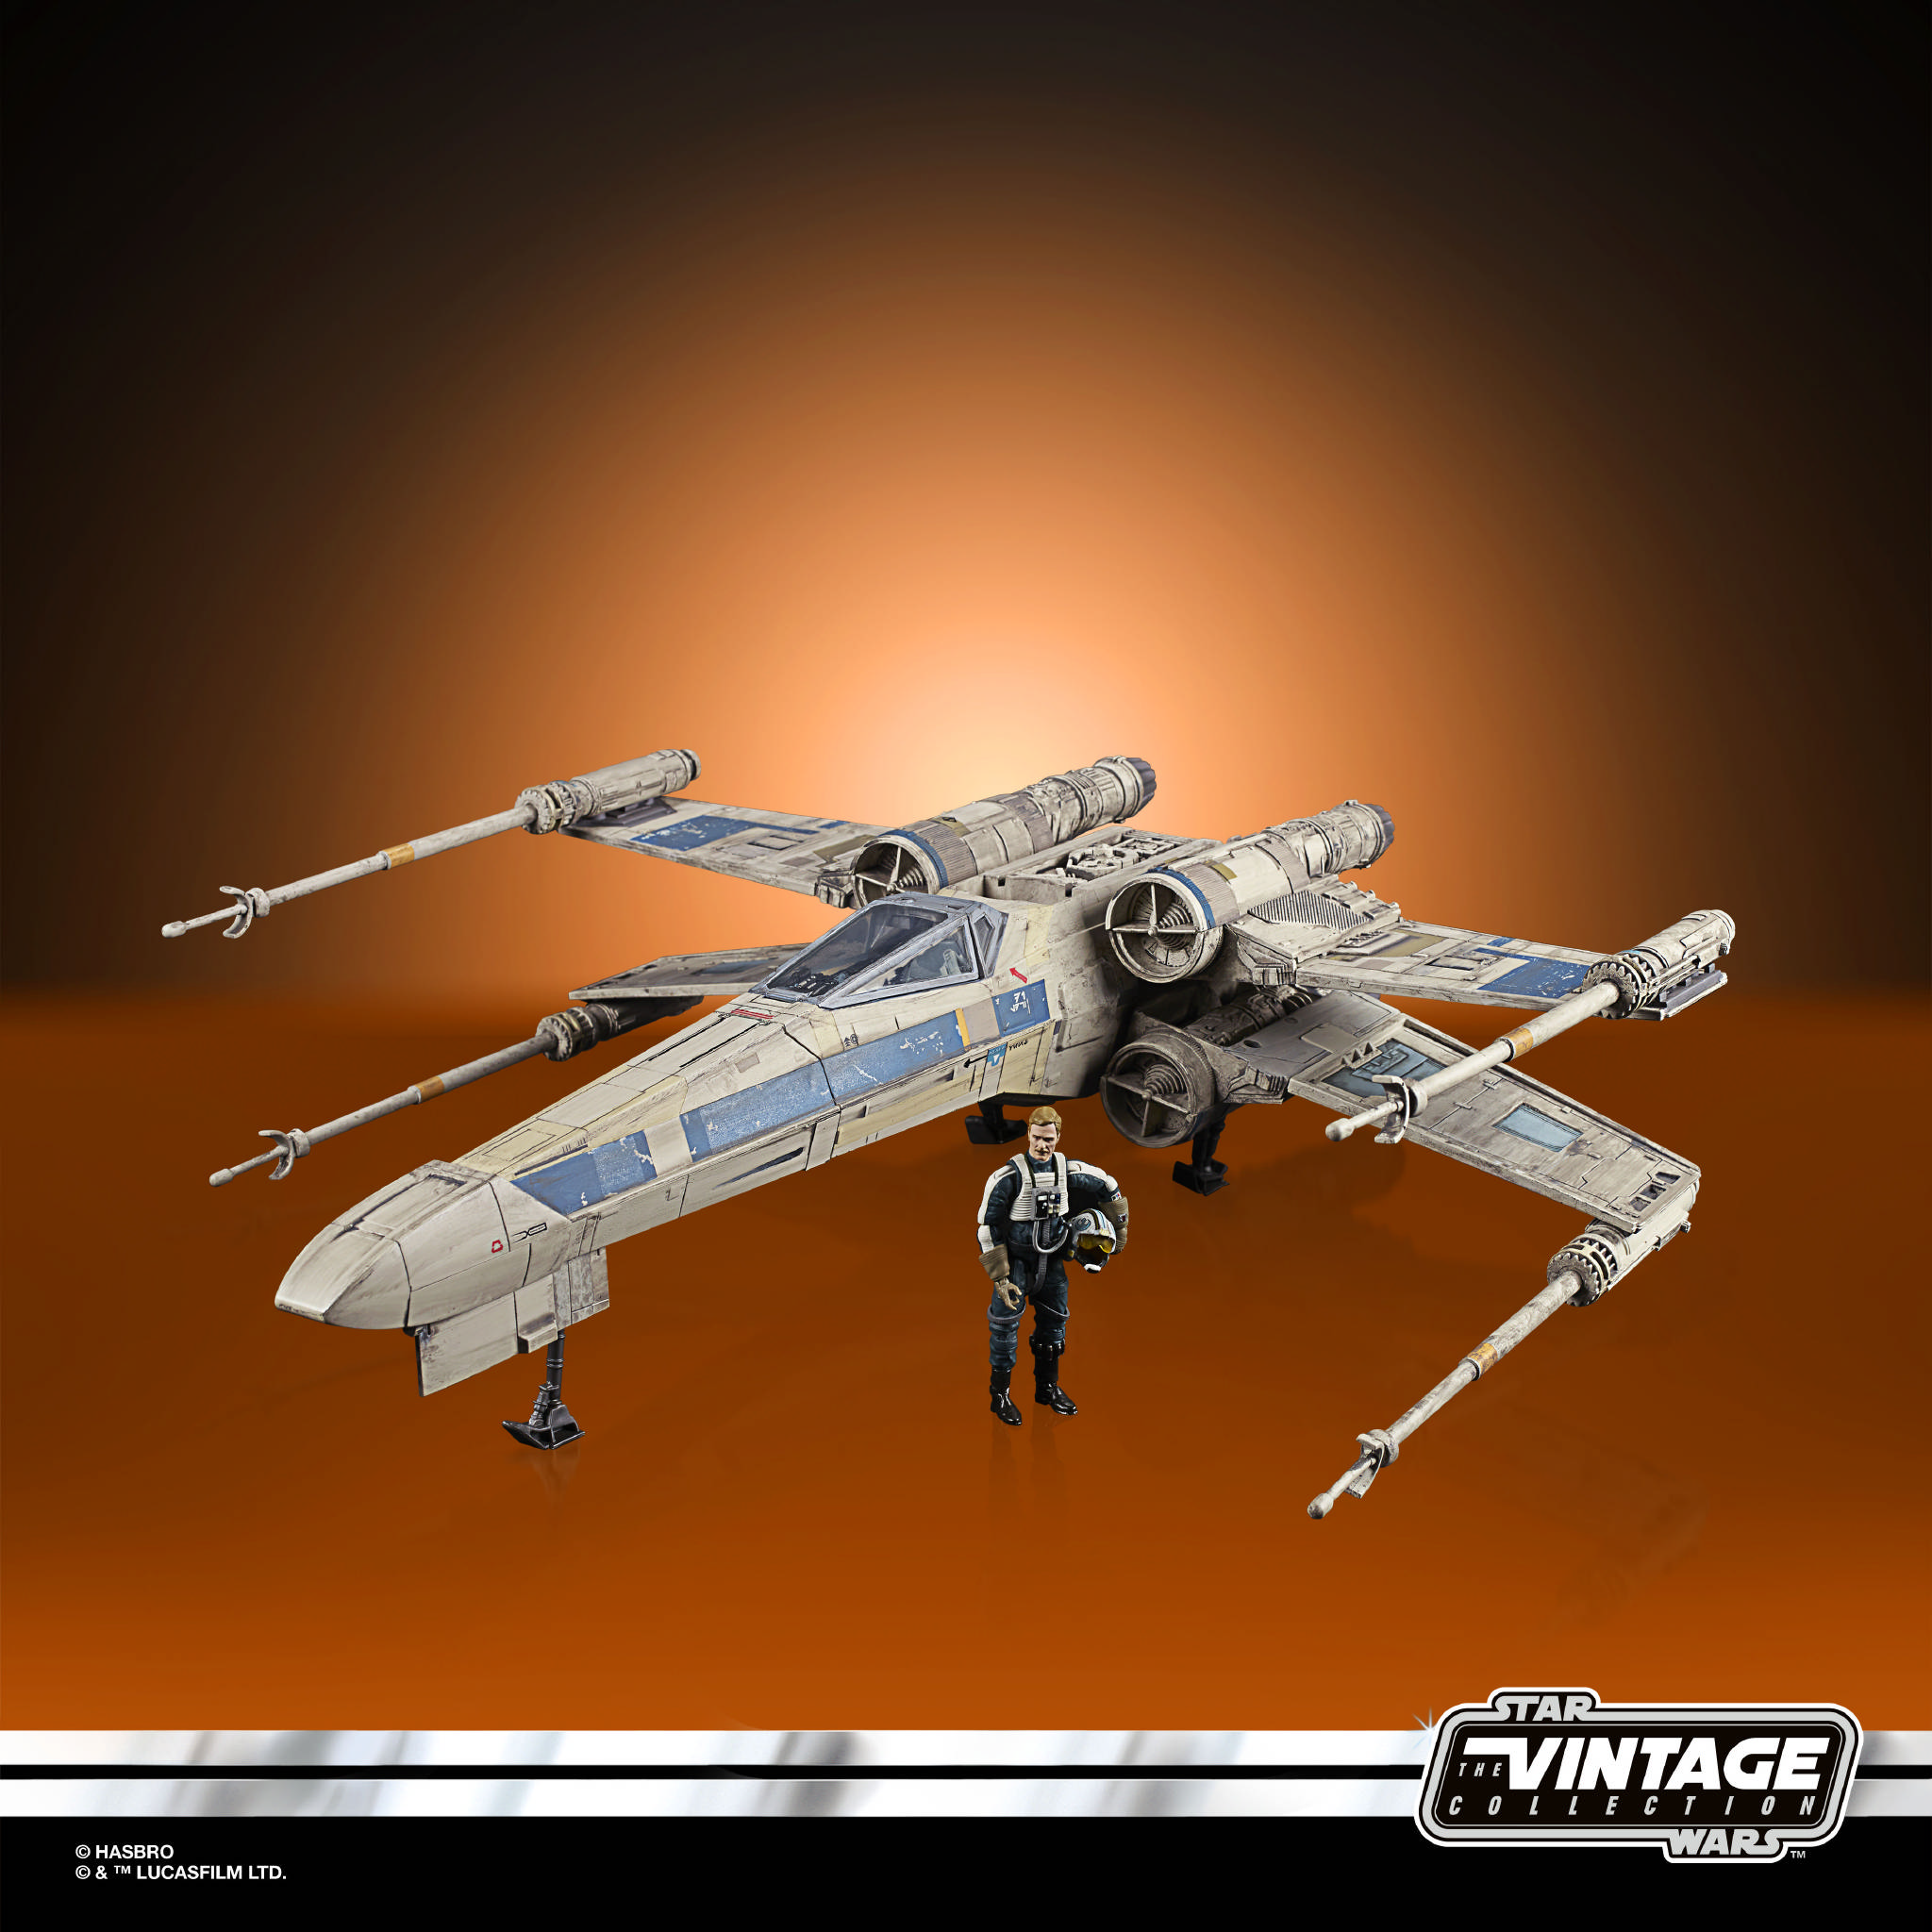 Hasbro Pulse Fanfest 2021: Star Wars Vintage Collection and Black Series Reveals